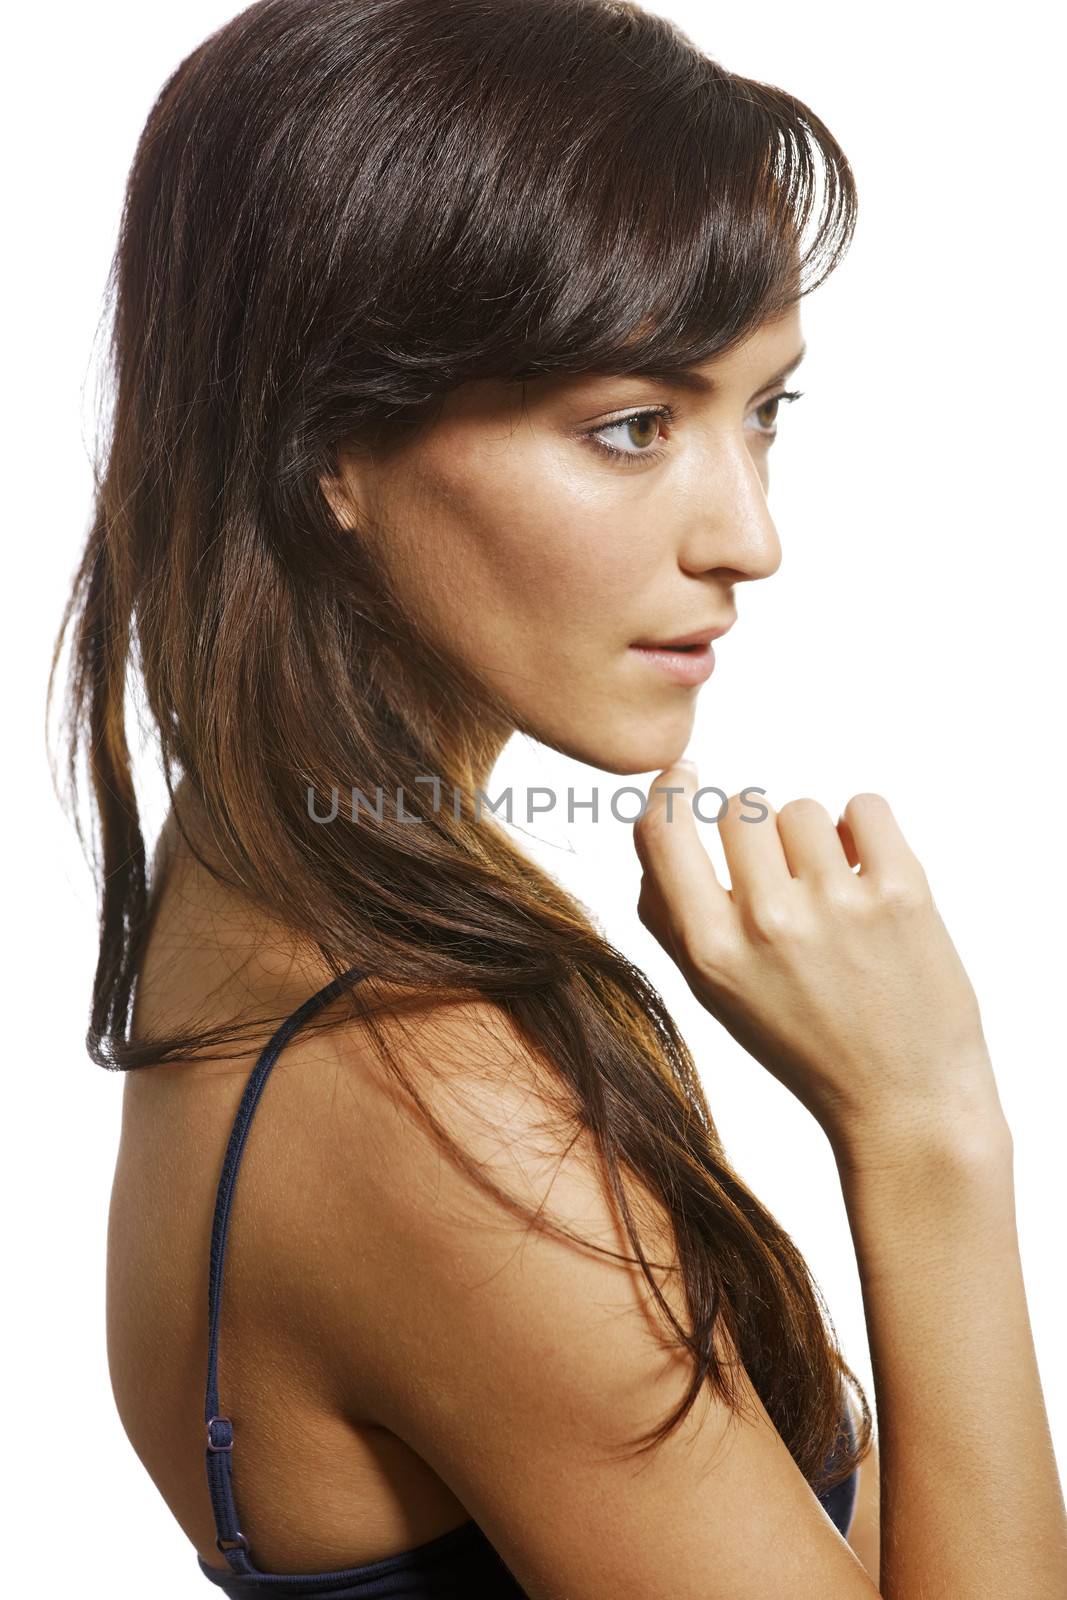 Beautiful young woman with a stern expression on white background